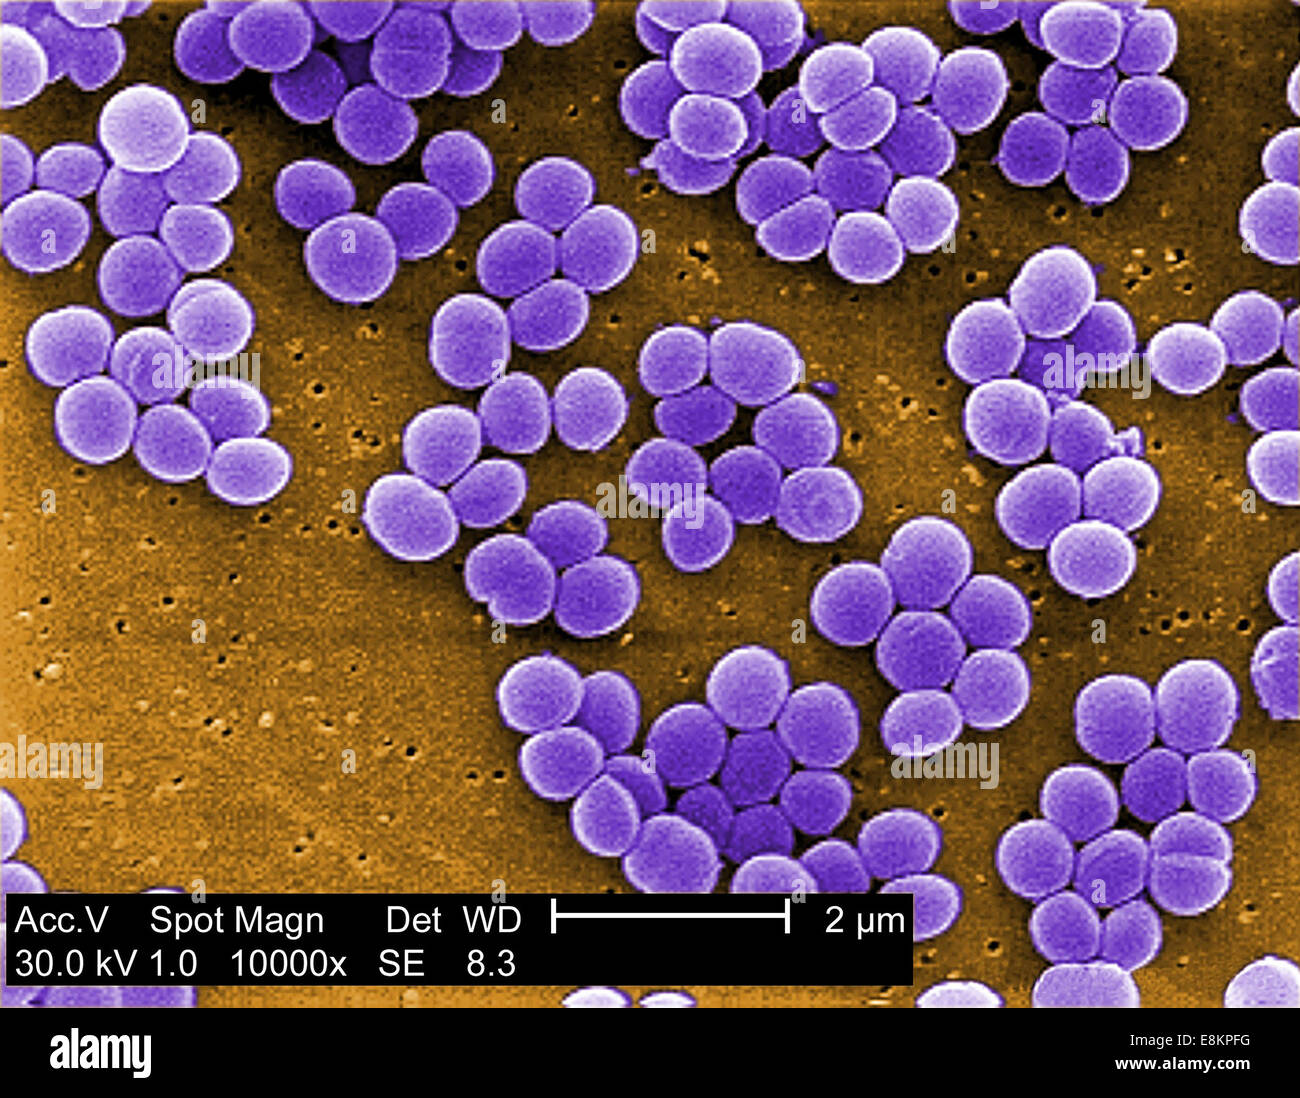 Picture showing Staphylococcus aureus under the microscope